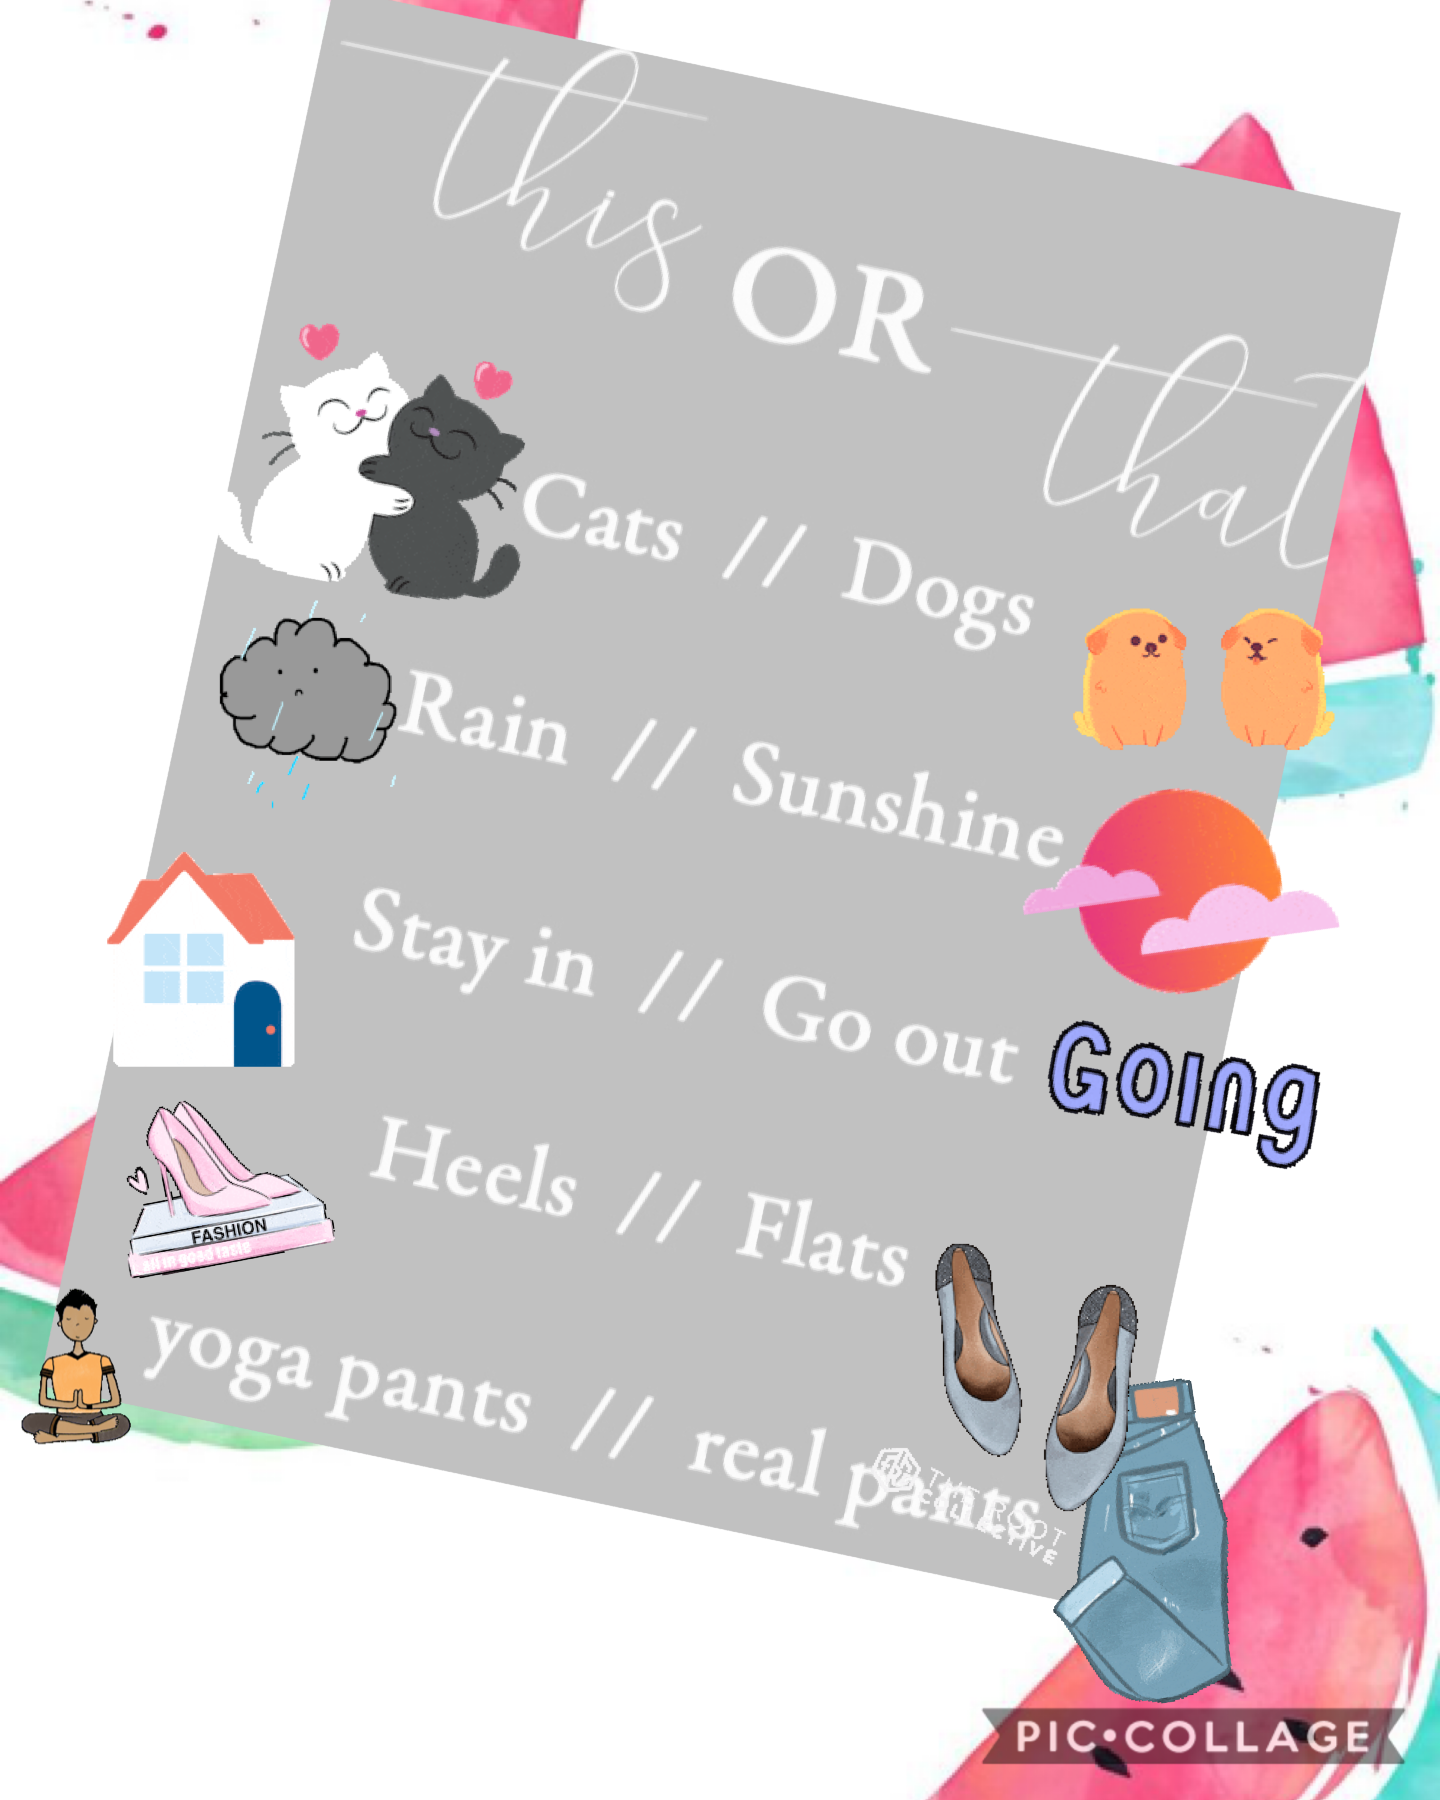 This or that!   🐱or🐶        🌧or☀️   🏠Or🎆   👠or🥿    🤸🏼‍♀️or👖